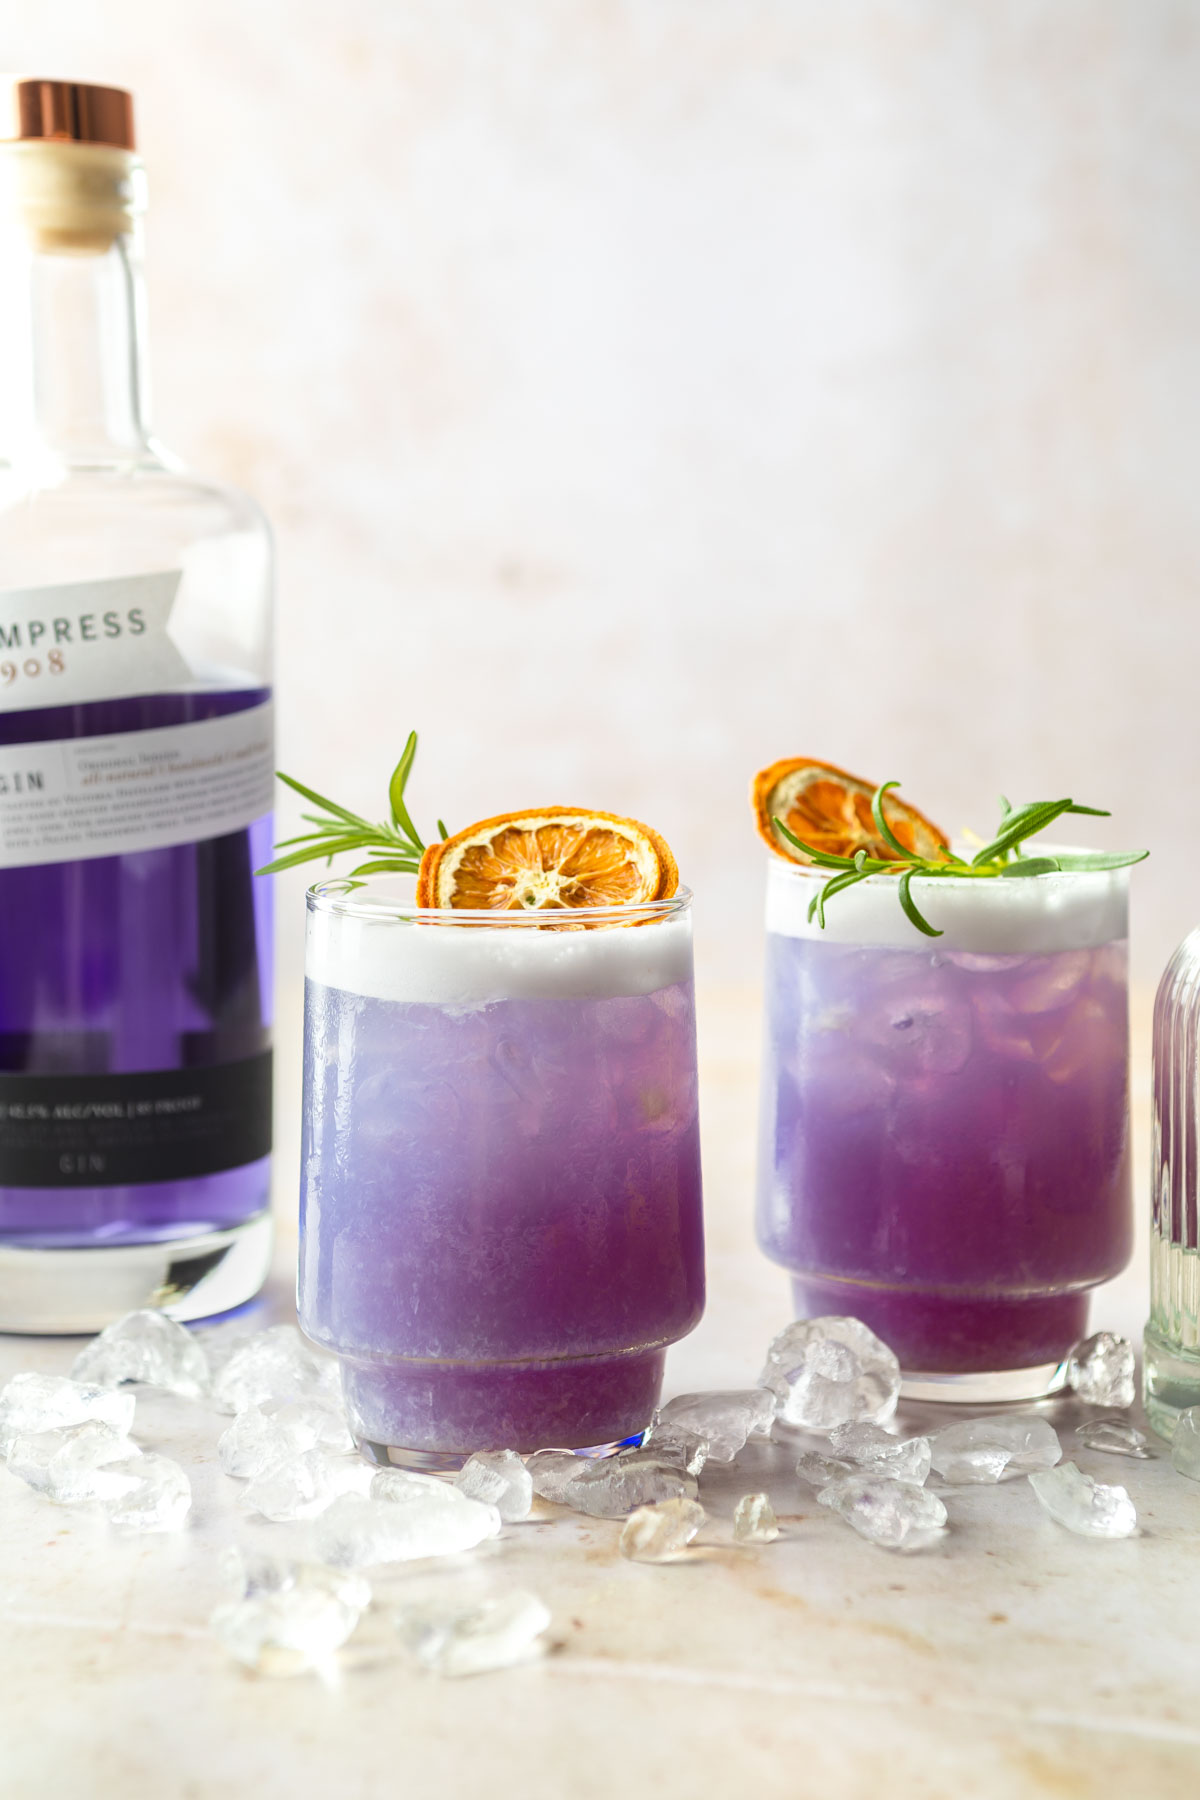 Two purple empress gin cocktails garnished with rosemary sprigs and dried orange slices, with a bottle of purple empress gin in the background.